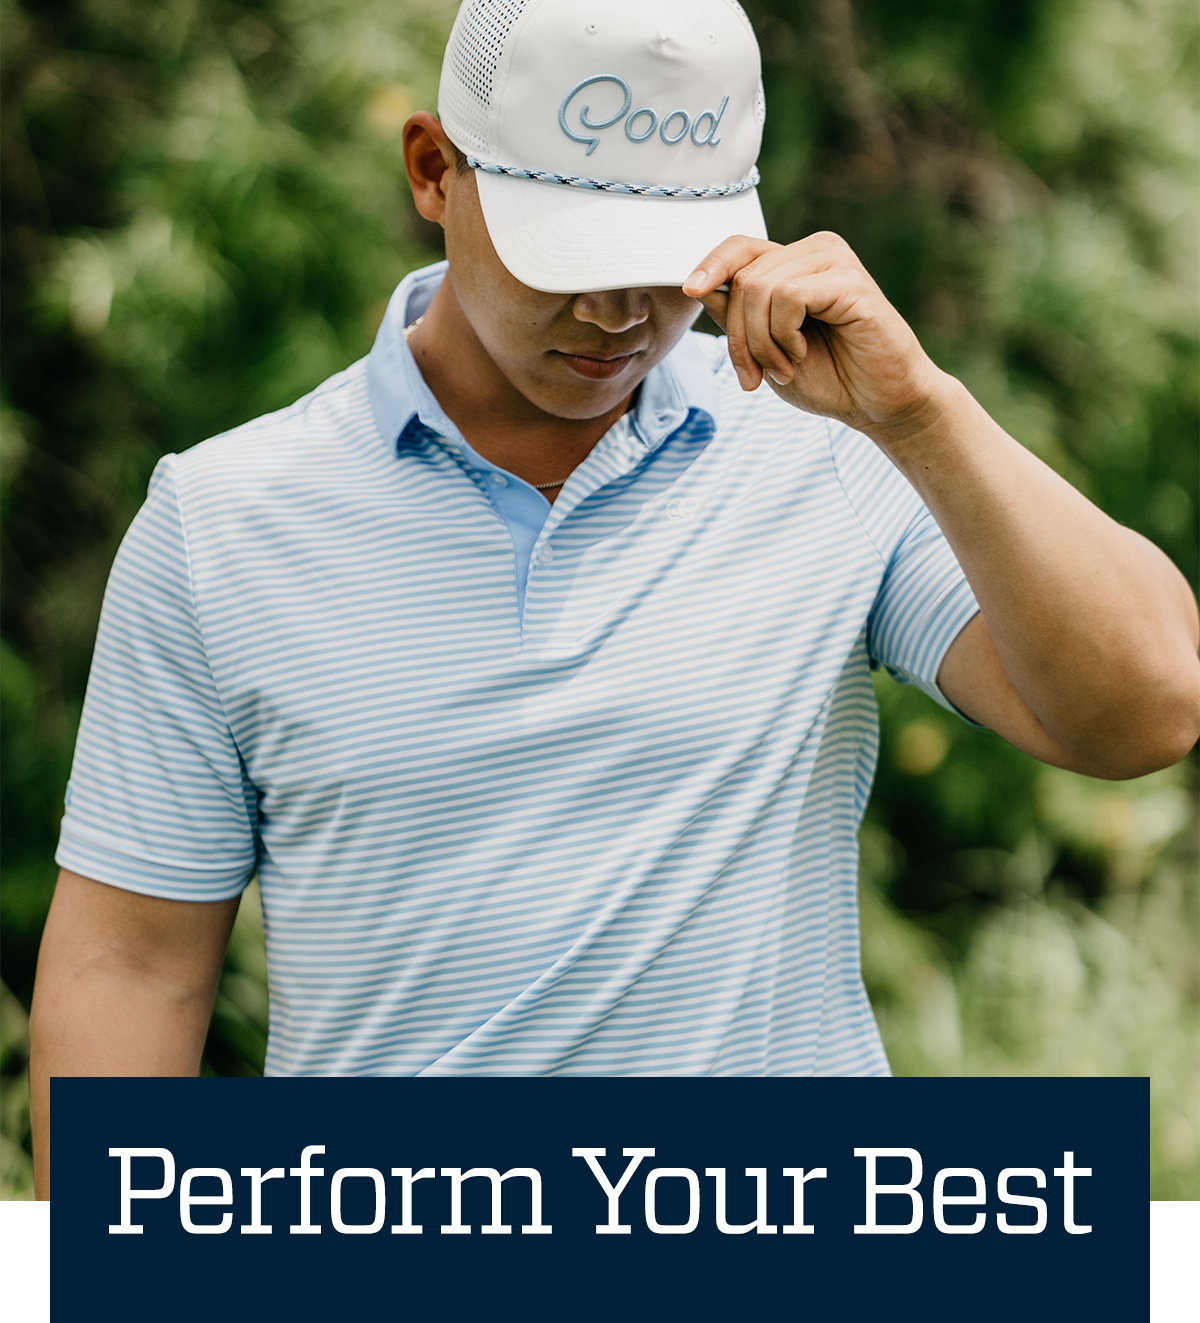  Perform your best.